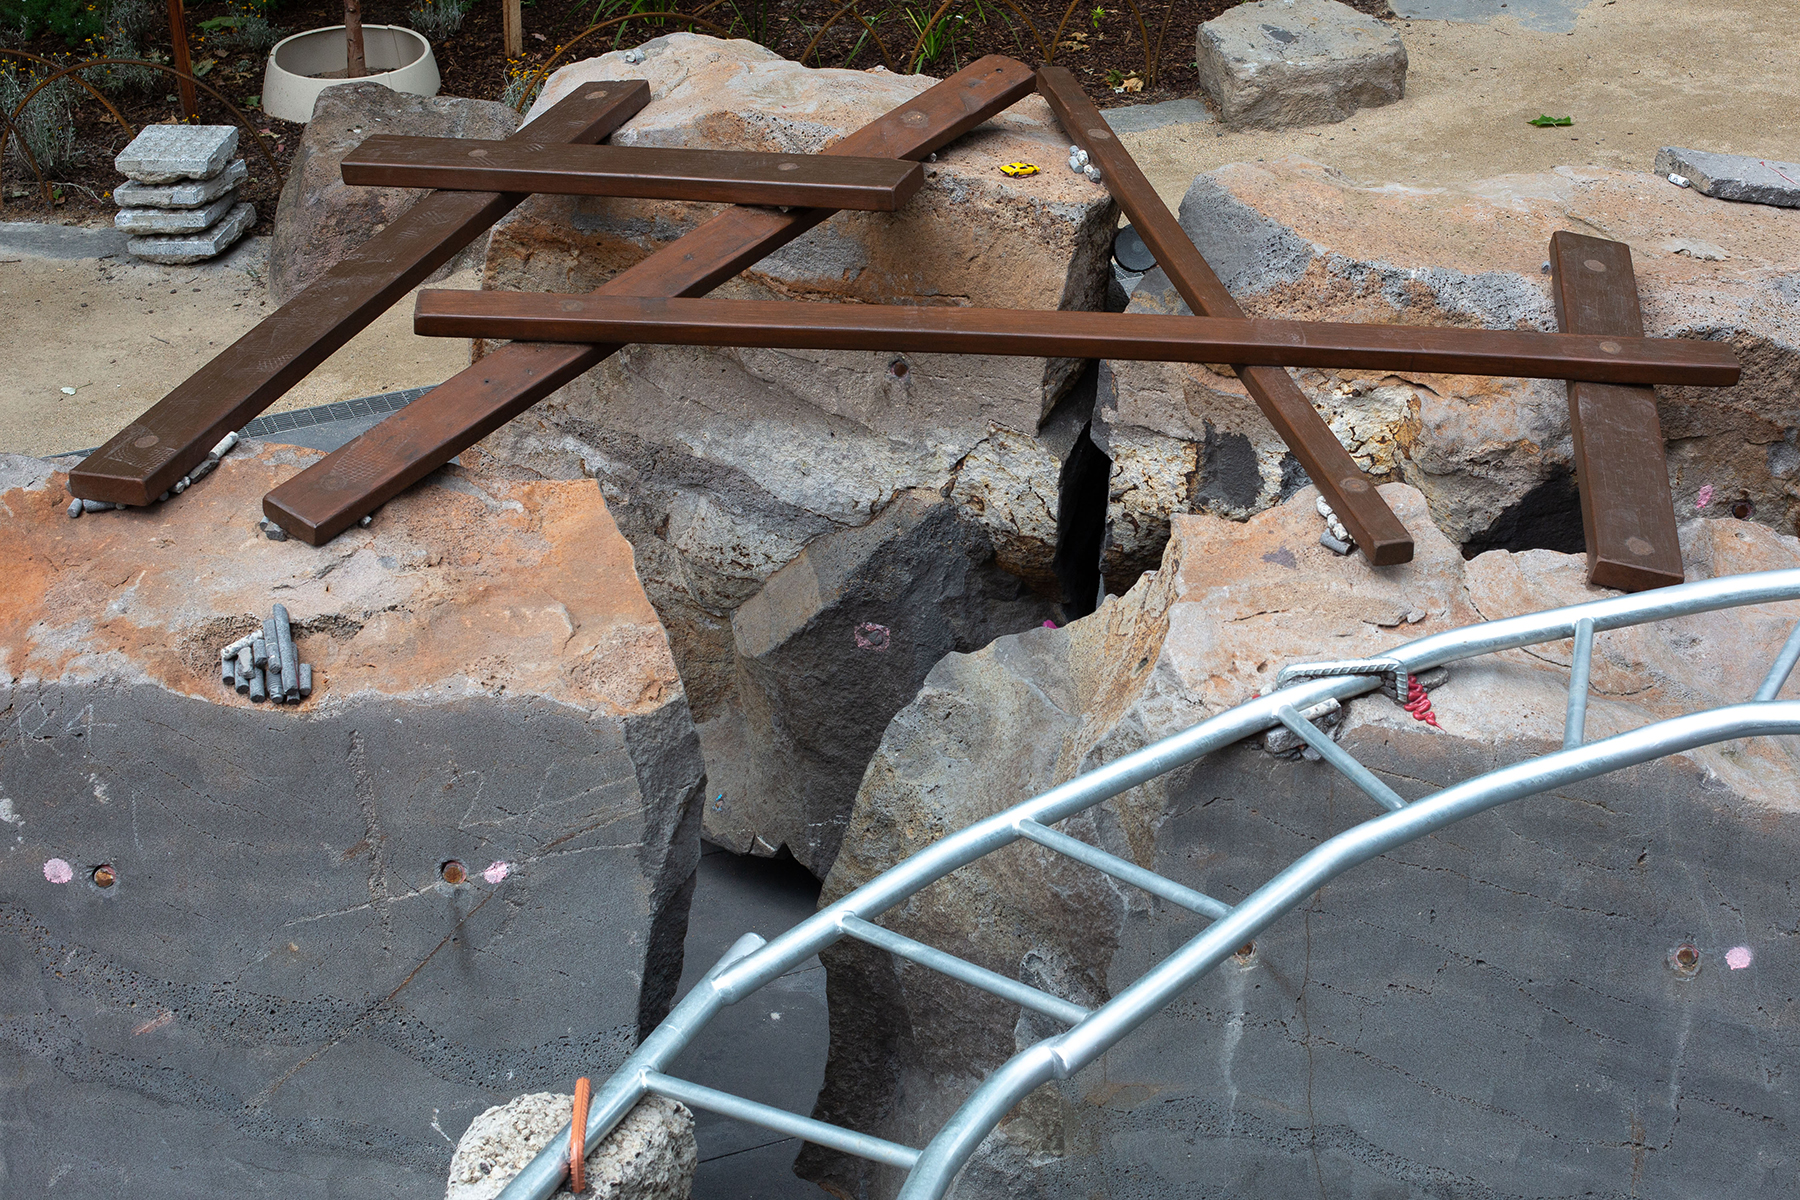 To lend a feeling of precariousness to the playground, creator Mike Hewson affixed to the boulders such materials as steel bars, pipes, rocks, and even hardened core samples left over from the project. (Image courtesy of Mike Hewson)